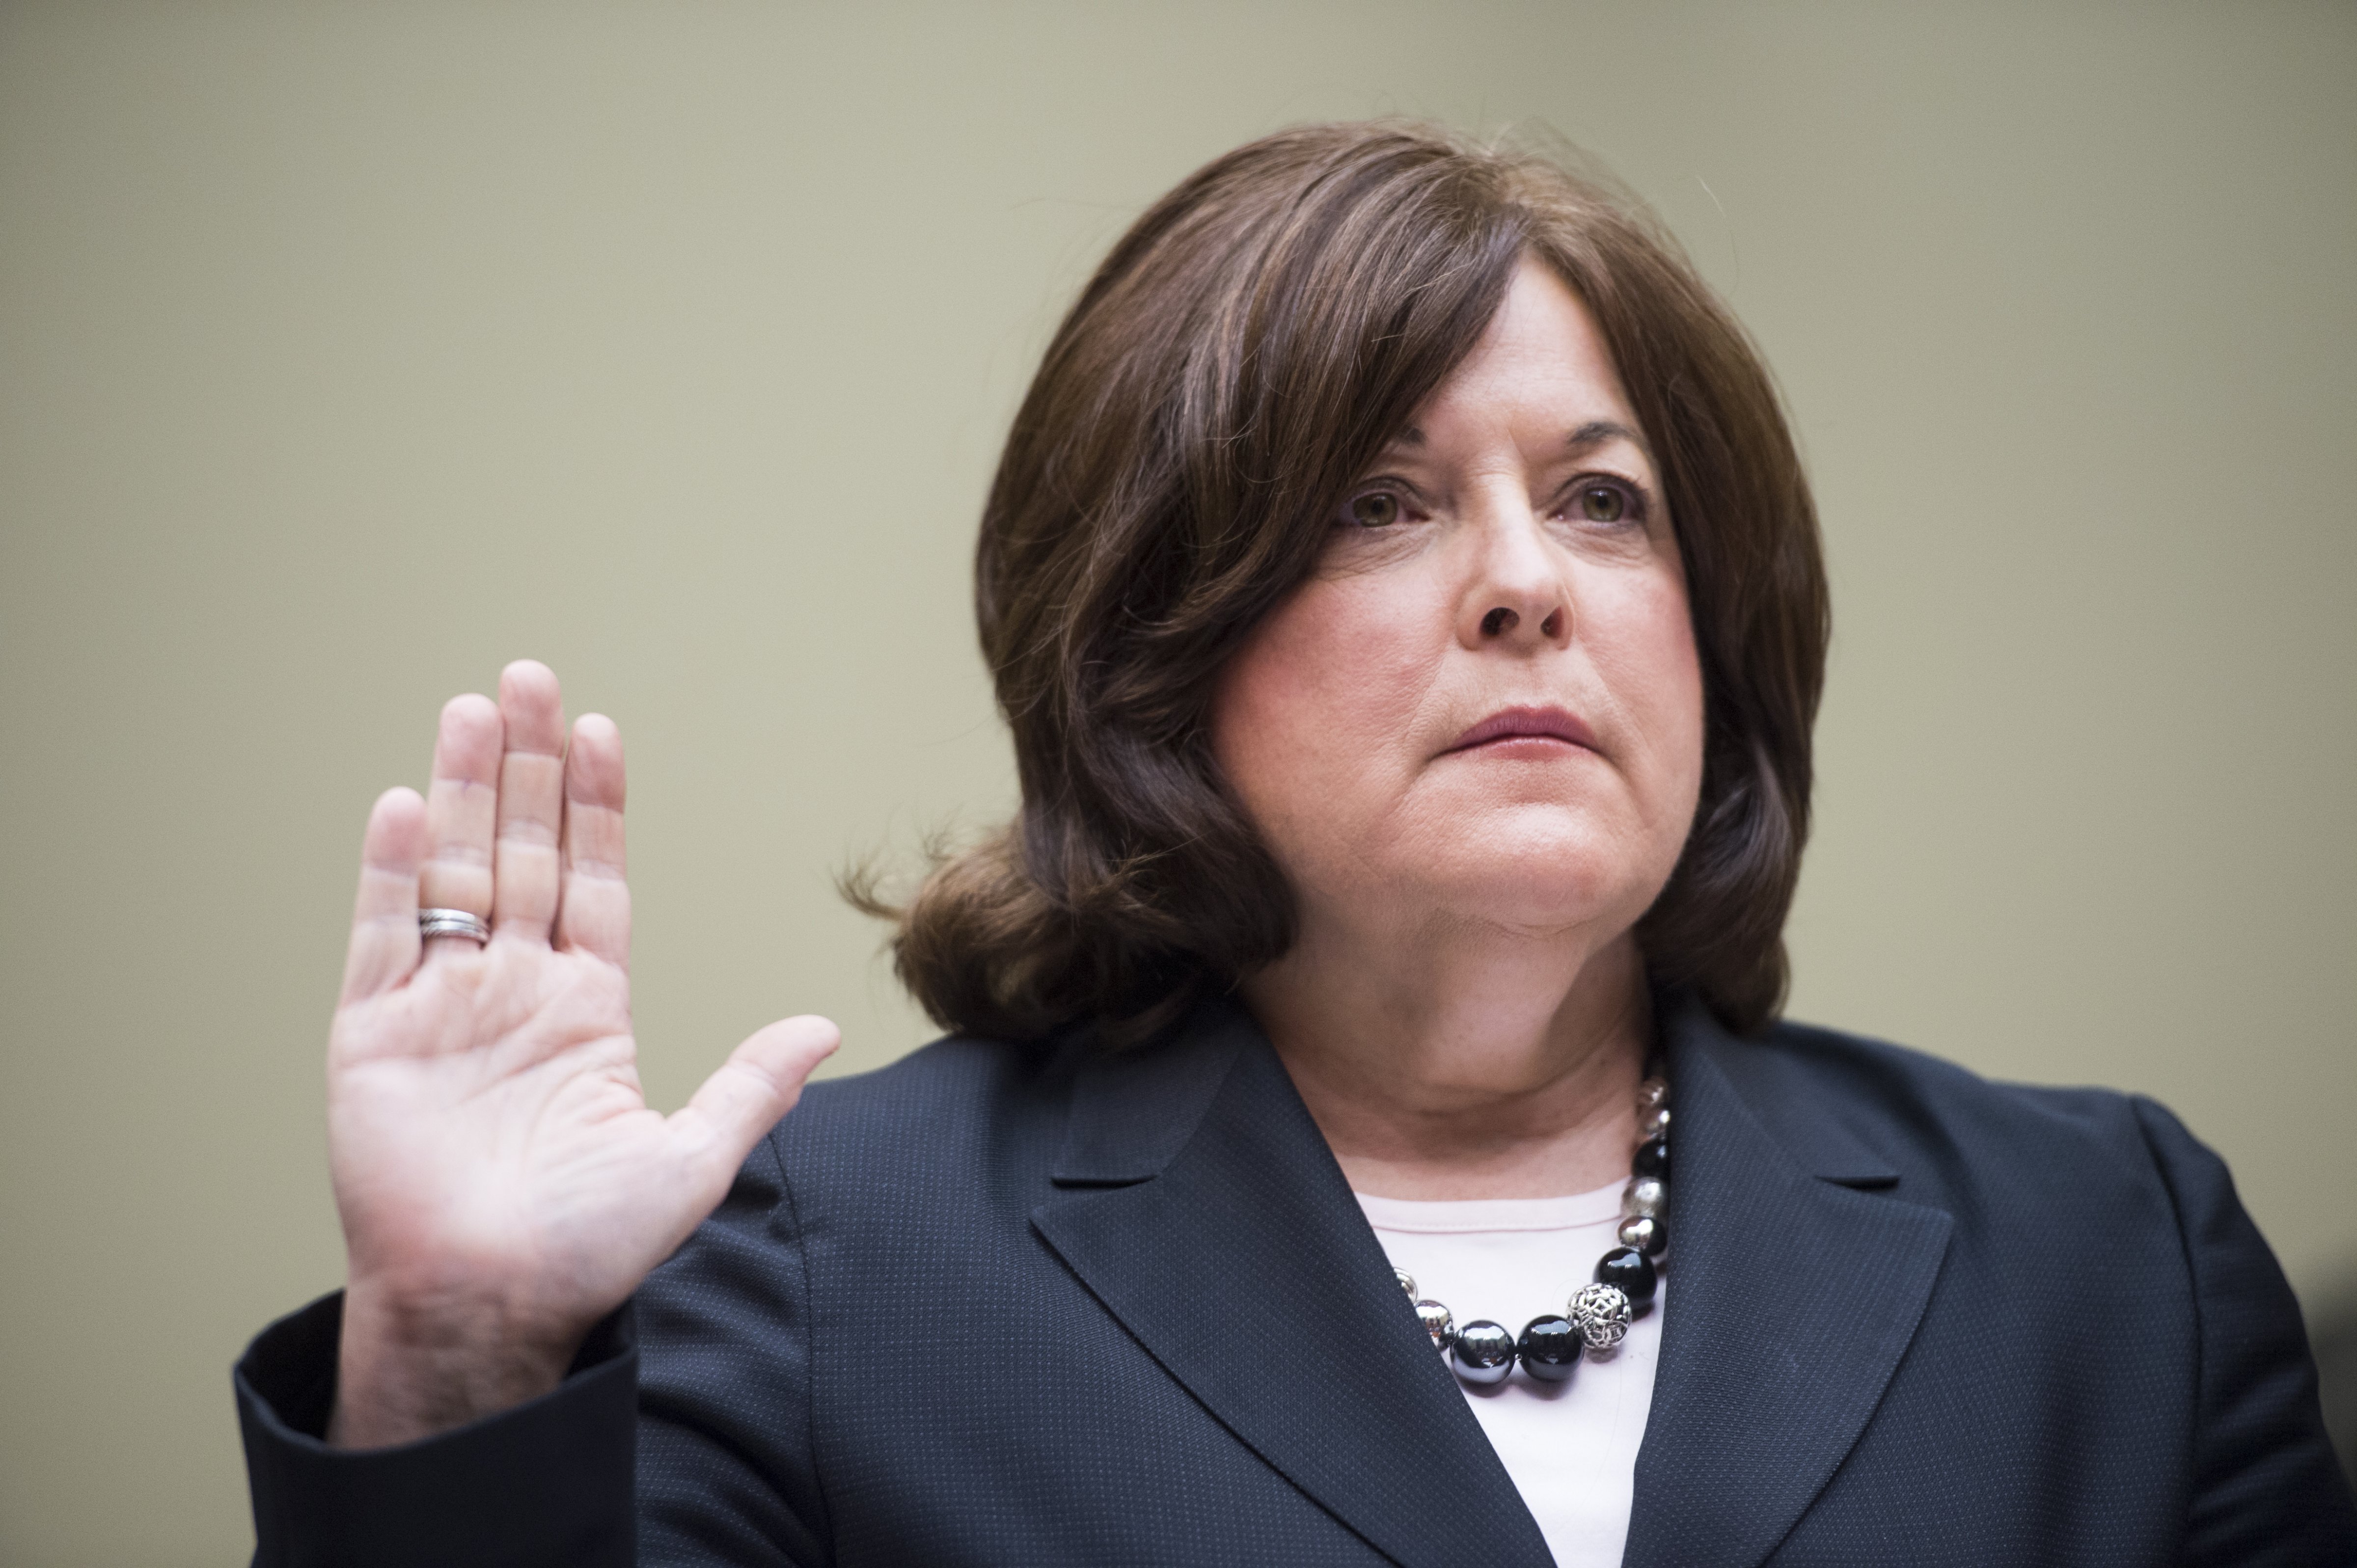 Secret Service Director Julia Pierson is sworn in before testifying during the House Oversight and Government Reform Committee hearing on "White House Perimeter Breach: New Concerns about the Secret Service" on Sept. 30, 2014. (Bill Clark—CQ-Roll Call)